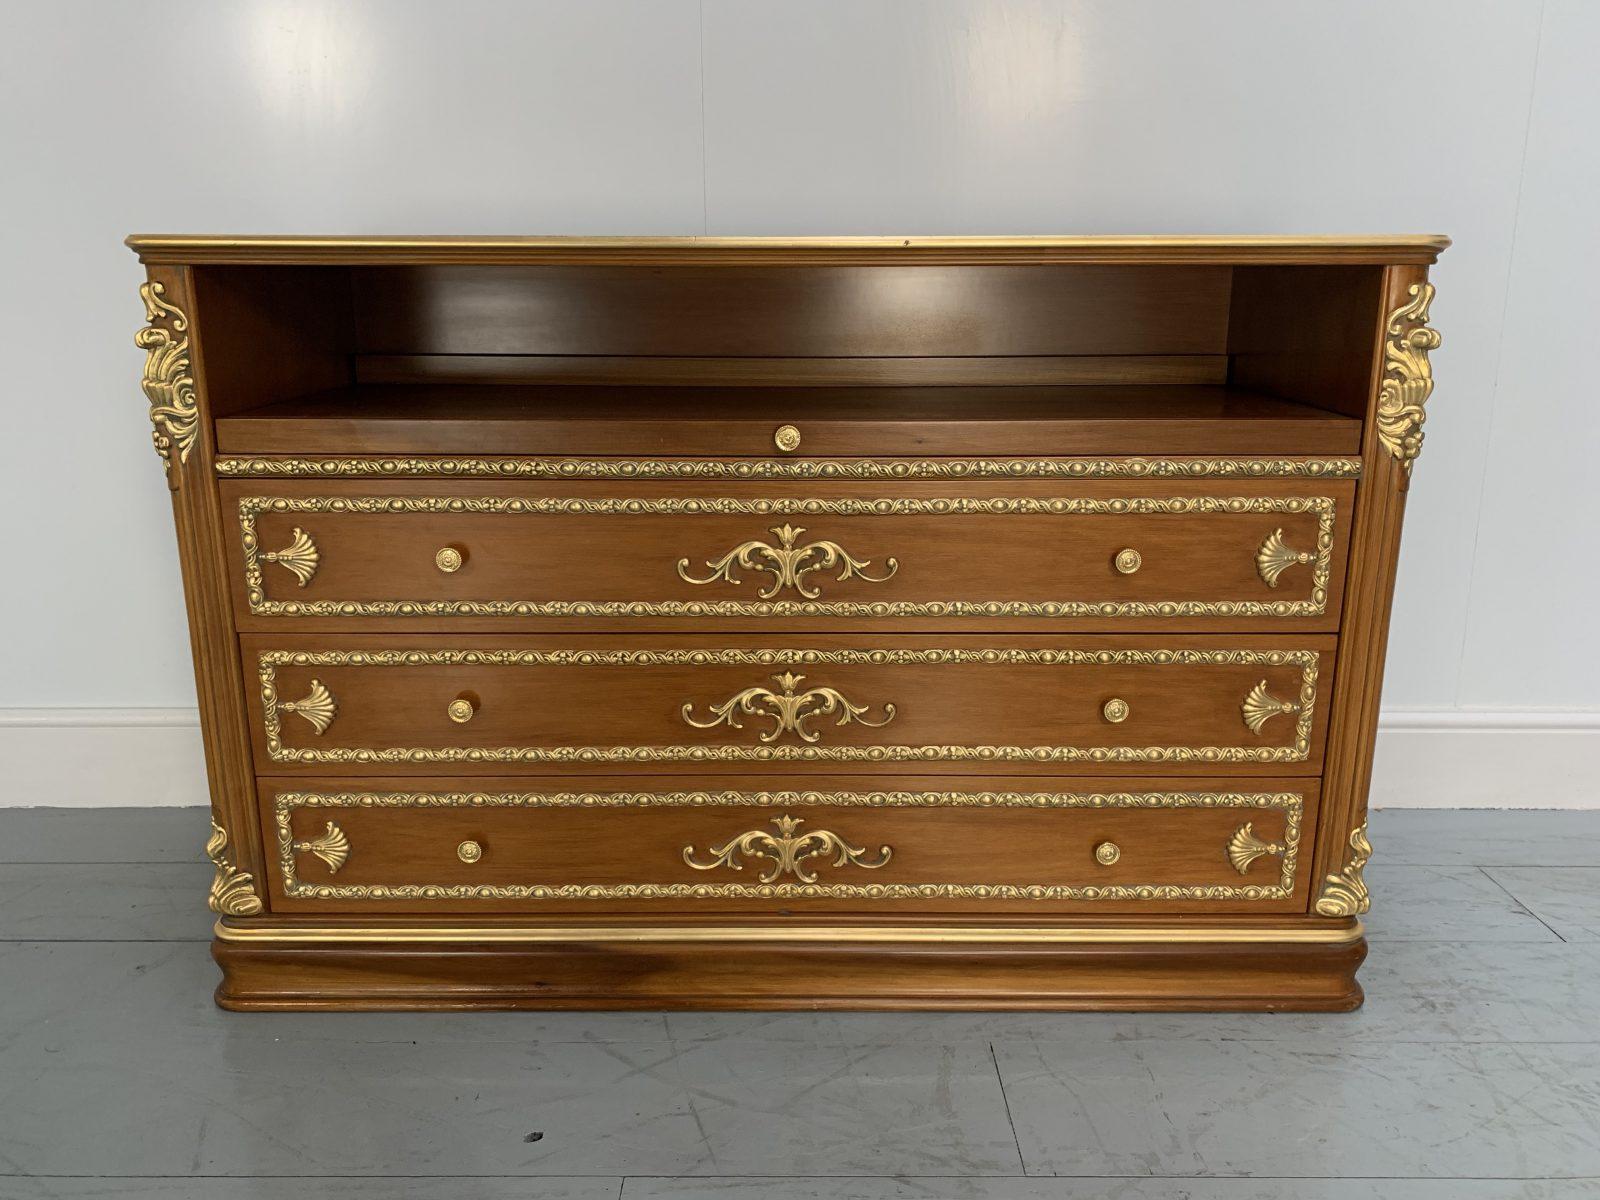 By choosing to view this listing, i can only assume you are familiar with the world-renown “Asnaghi” brand, and fully-understand the nature of what is on offer.

Asnaghi make pieces of furniture that are far more than just that. They create real